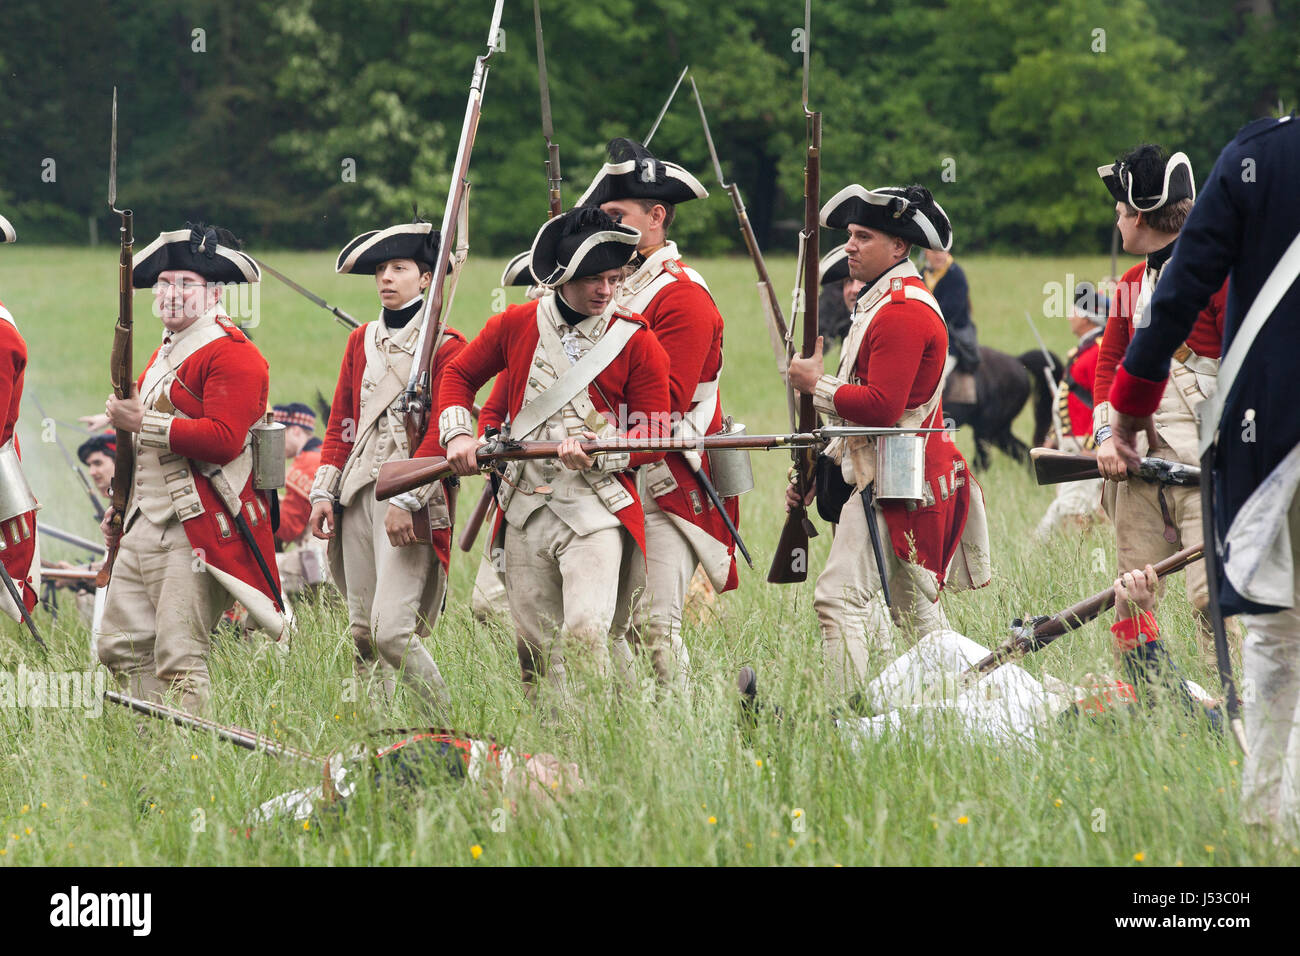 British soldiers during a reenactment of the 18th century  Revolutionary War at Mount Vernon - Virginia USA Stock Photo